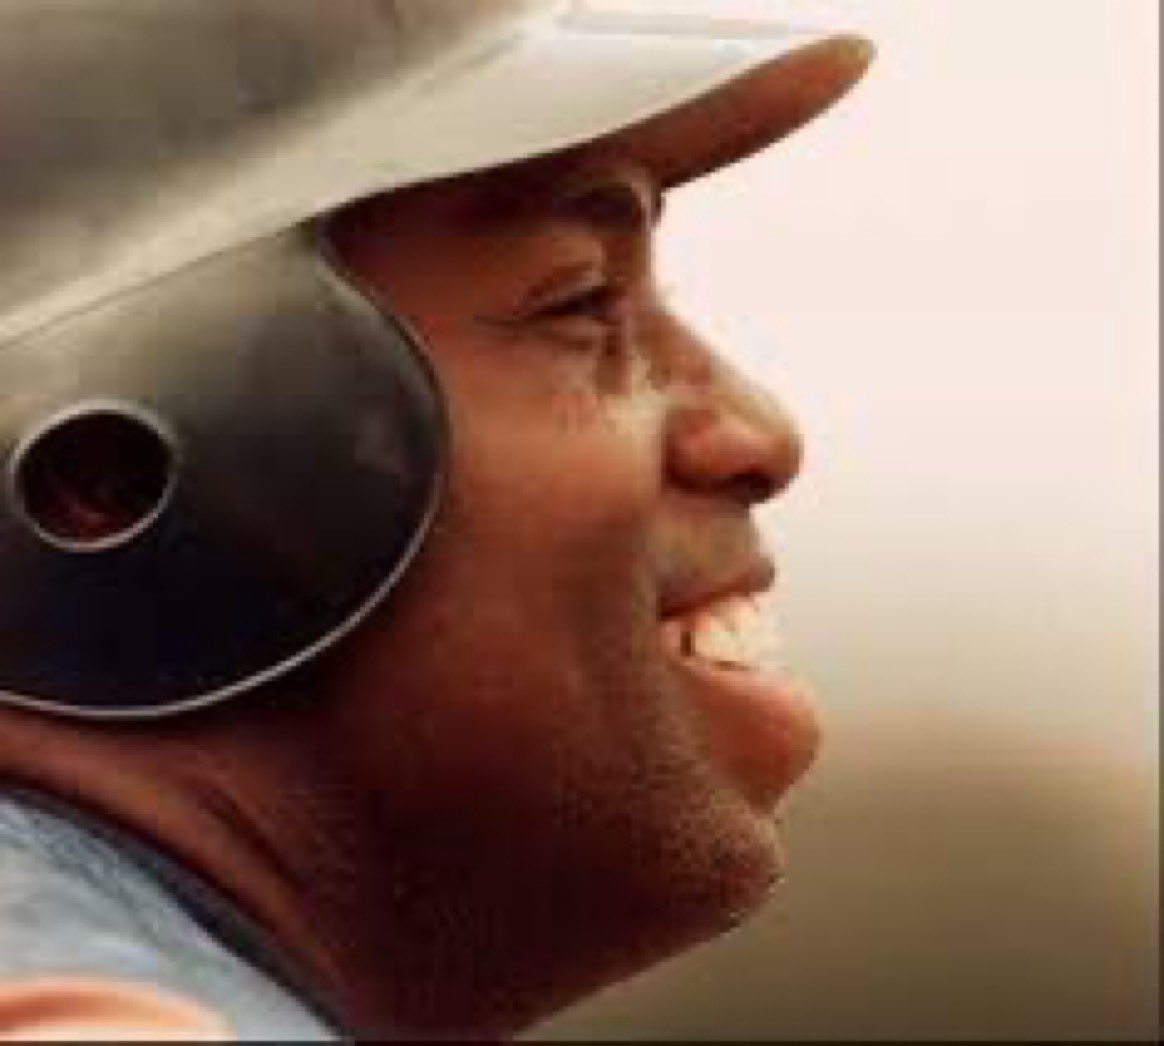 Willie Mays was a .301 lifetime hitter in the big leagues. Tony Gwynn was a .302 lifetime hitter with two strikes.